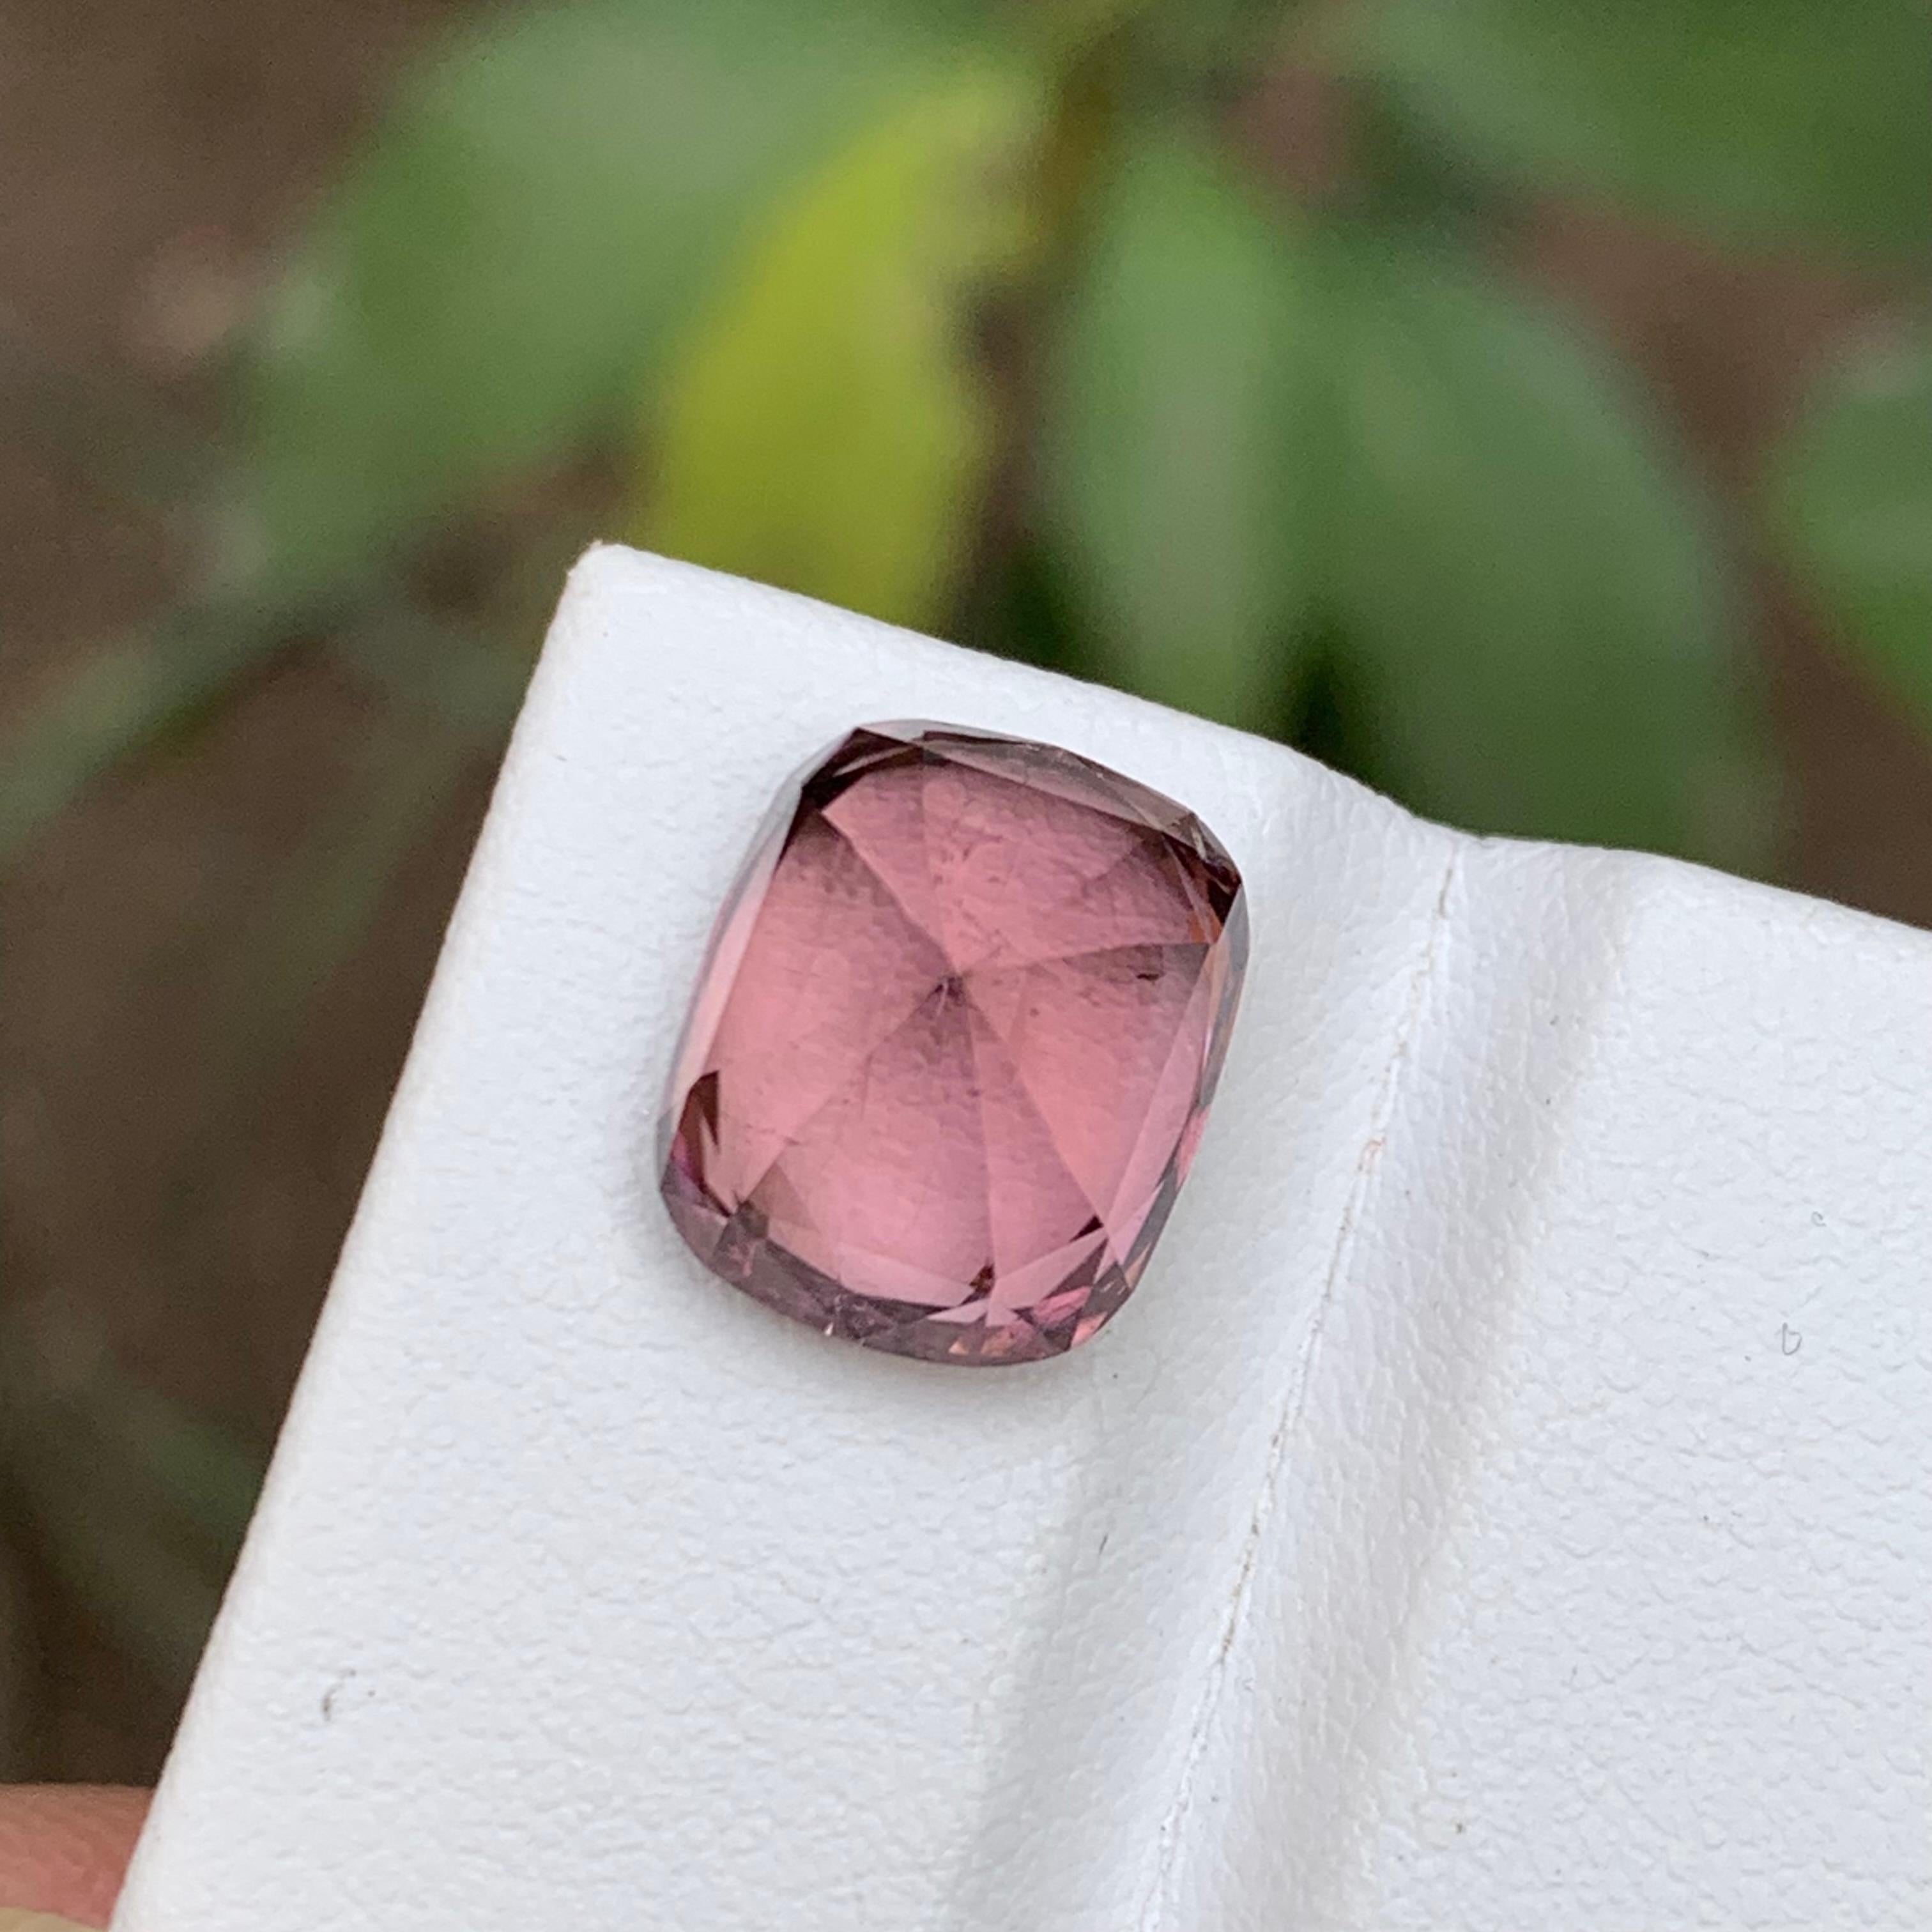 Women's or Men's Rare Soft Pink Natural Tourmaline Gemstone, 7.50 Ct Cushion Cut for Ring/Pendant For Sale